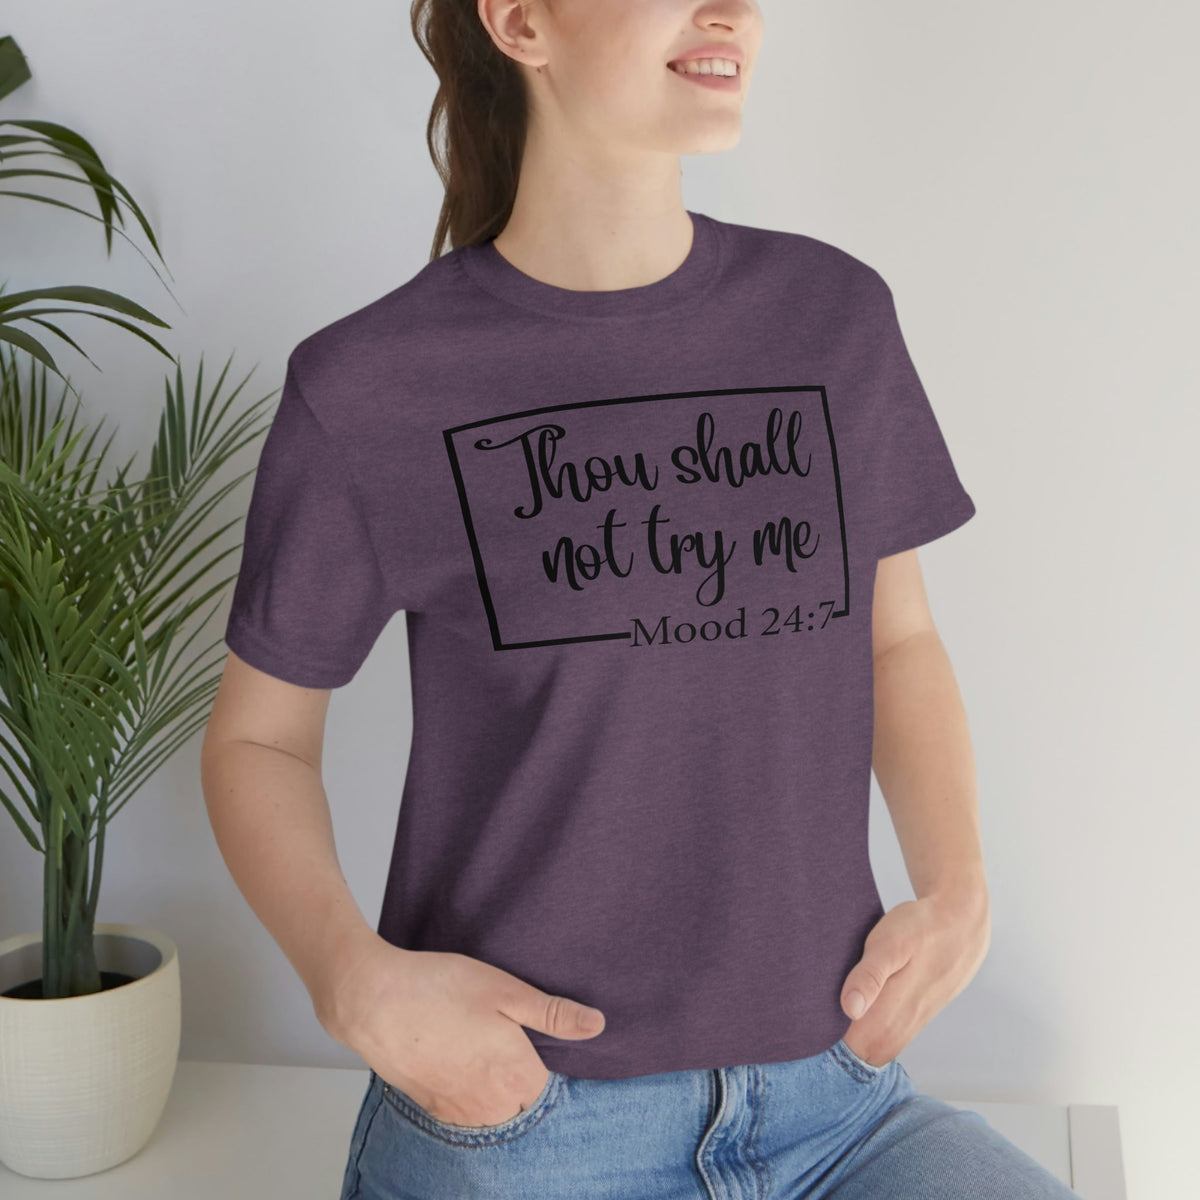 Thou Shall Not Try Me Mood 24:7 Women's Short Sleeve Tee - Salty Medic Clothing Co.